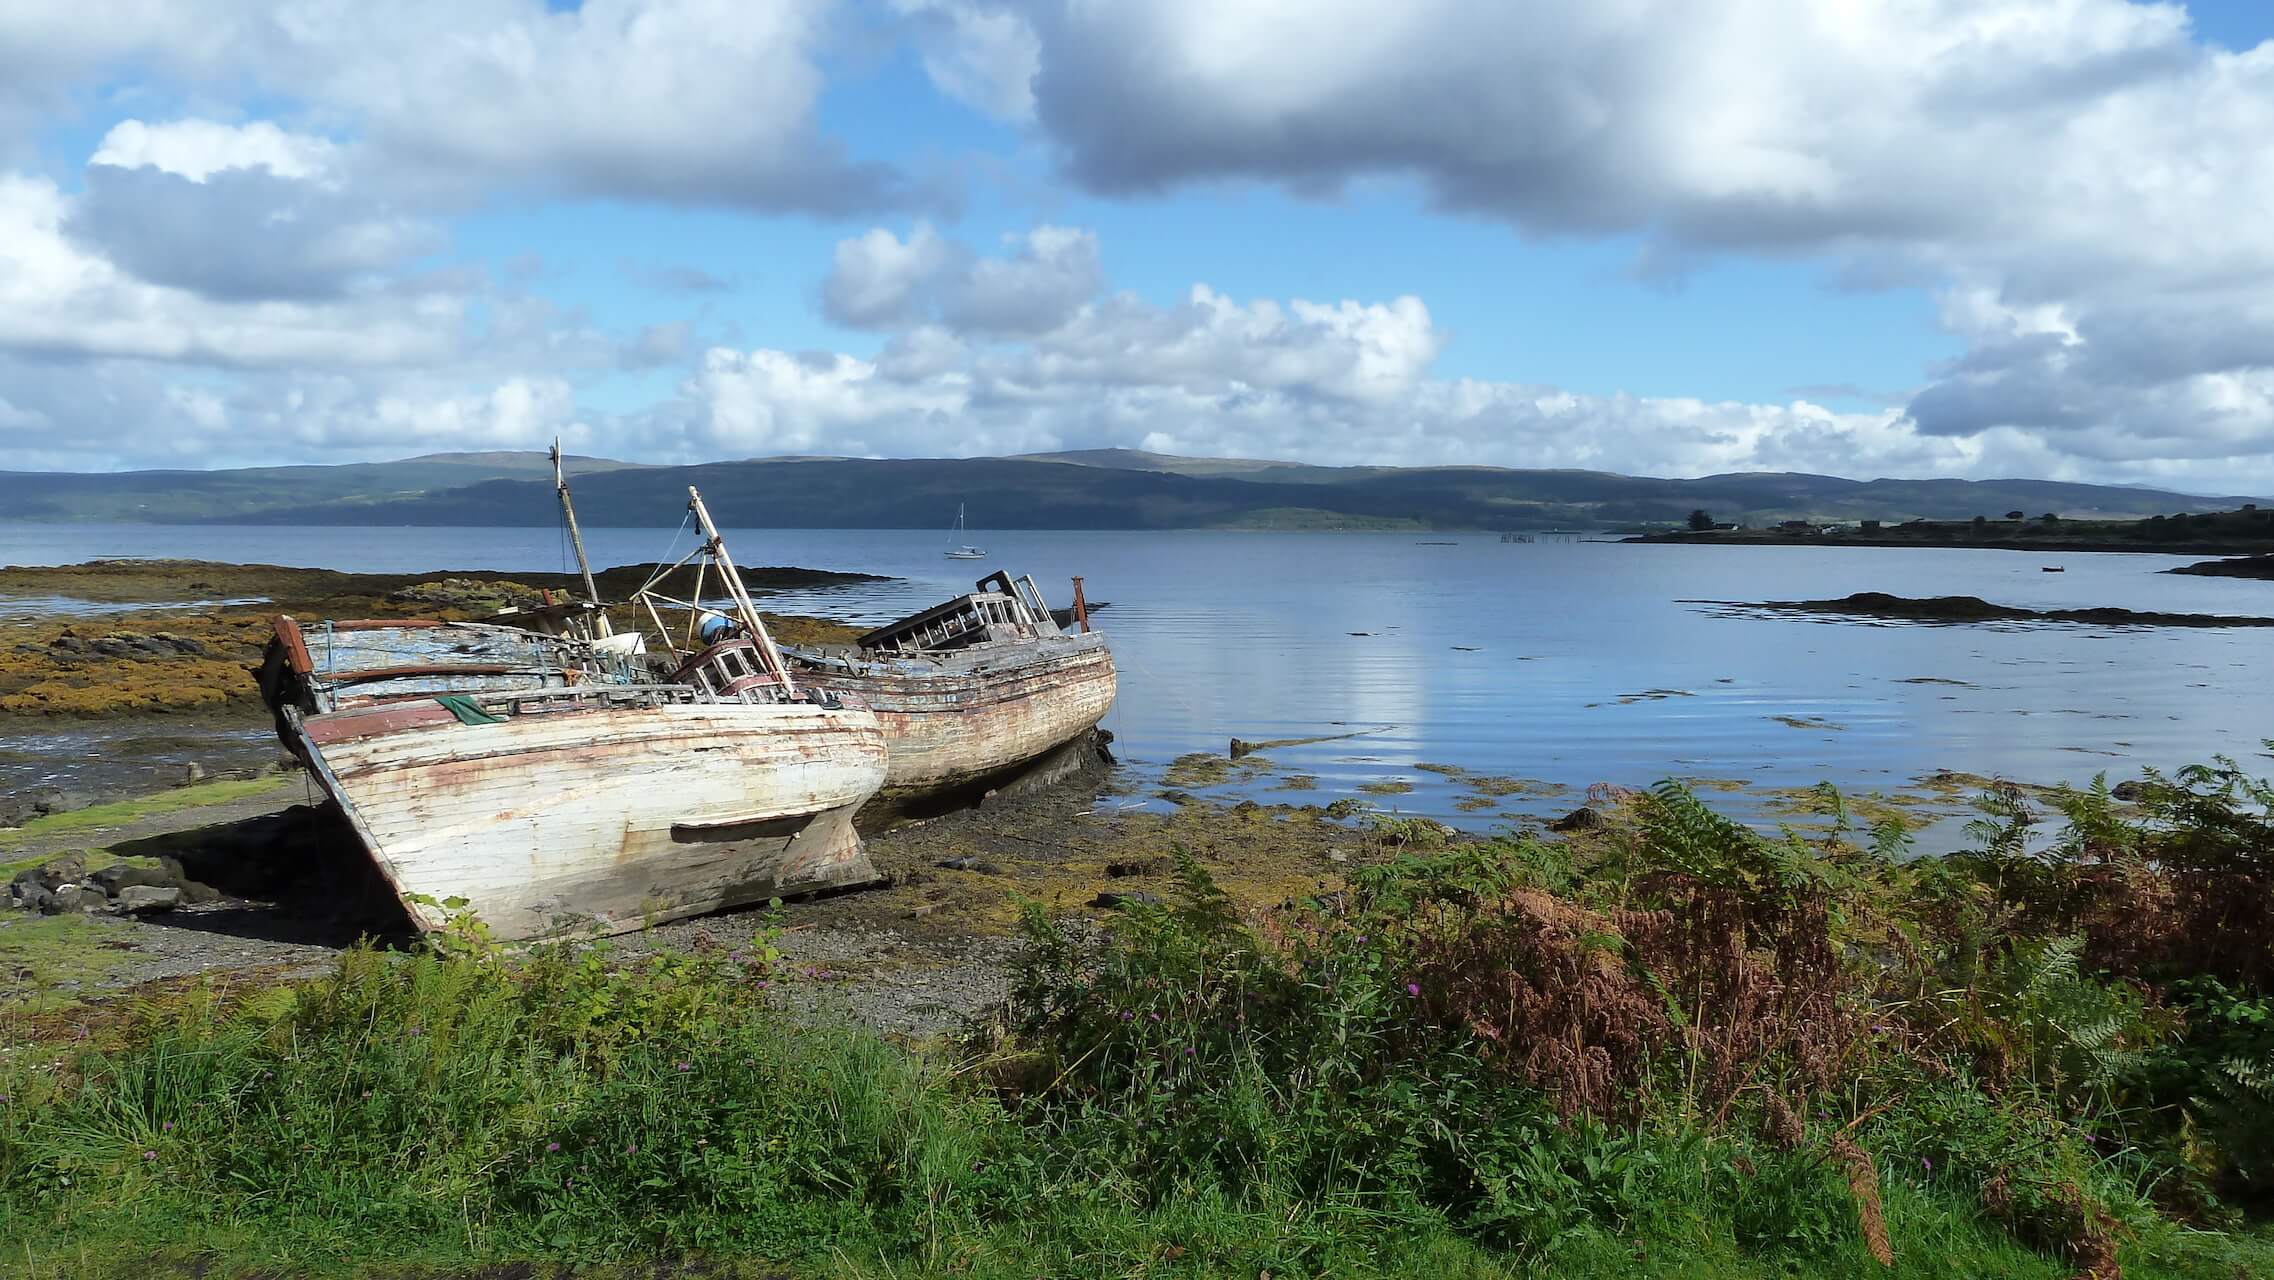 Wrecked wooden boats in the village of Salen, Isle of Mull